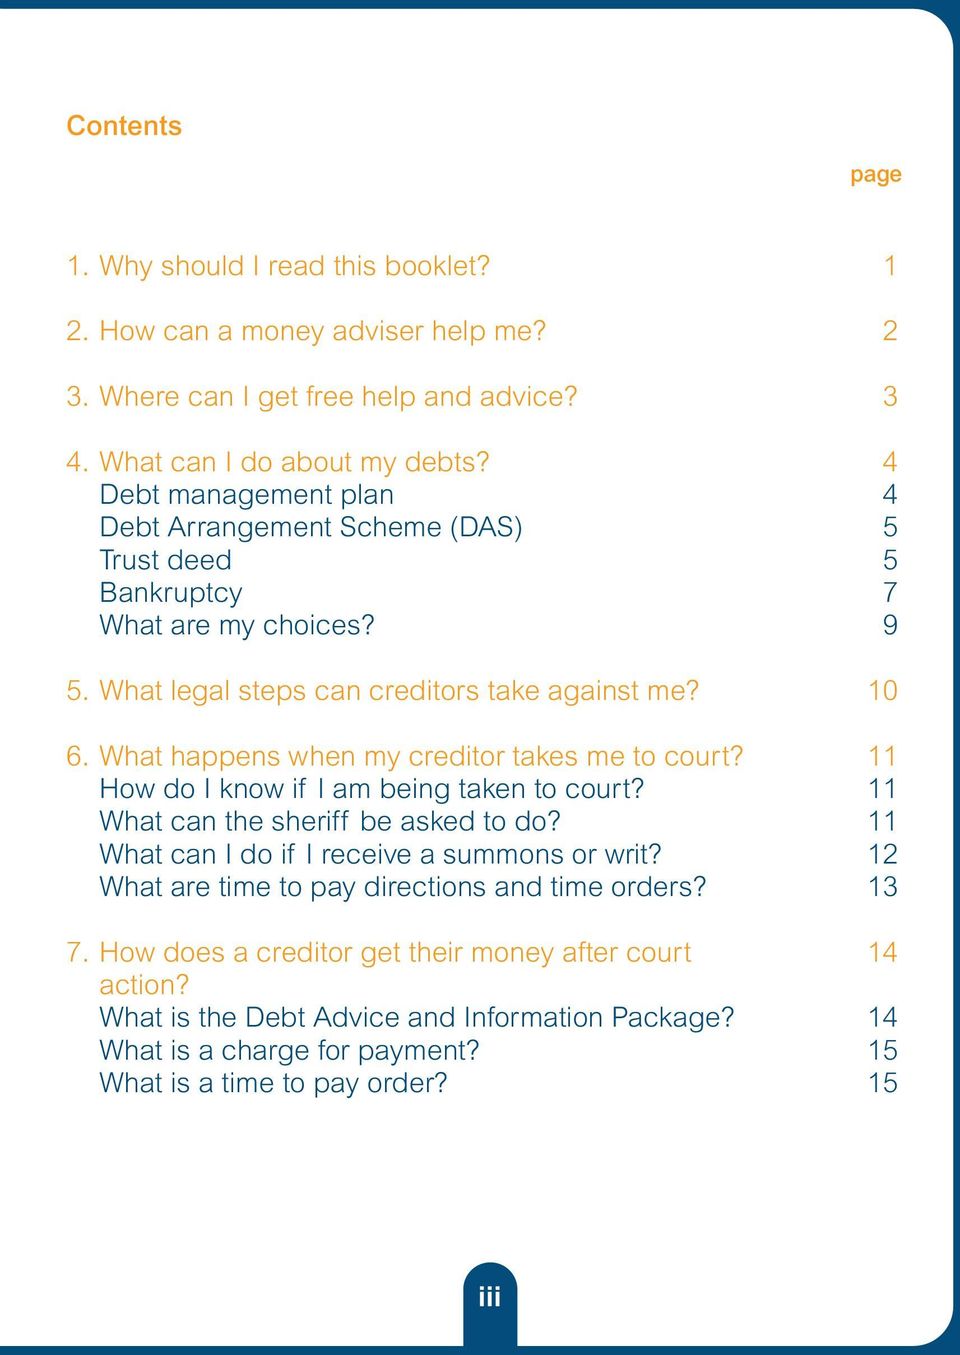 What happens when my creditor takes me to court? 11 How do I know if I am being taken to court? 11 What can the sheriff be asked to do? 11 What can I do if I receive a summons or writ?